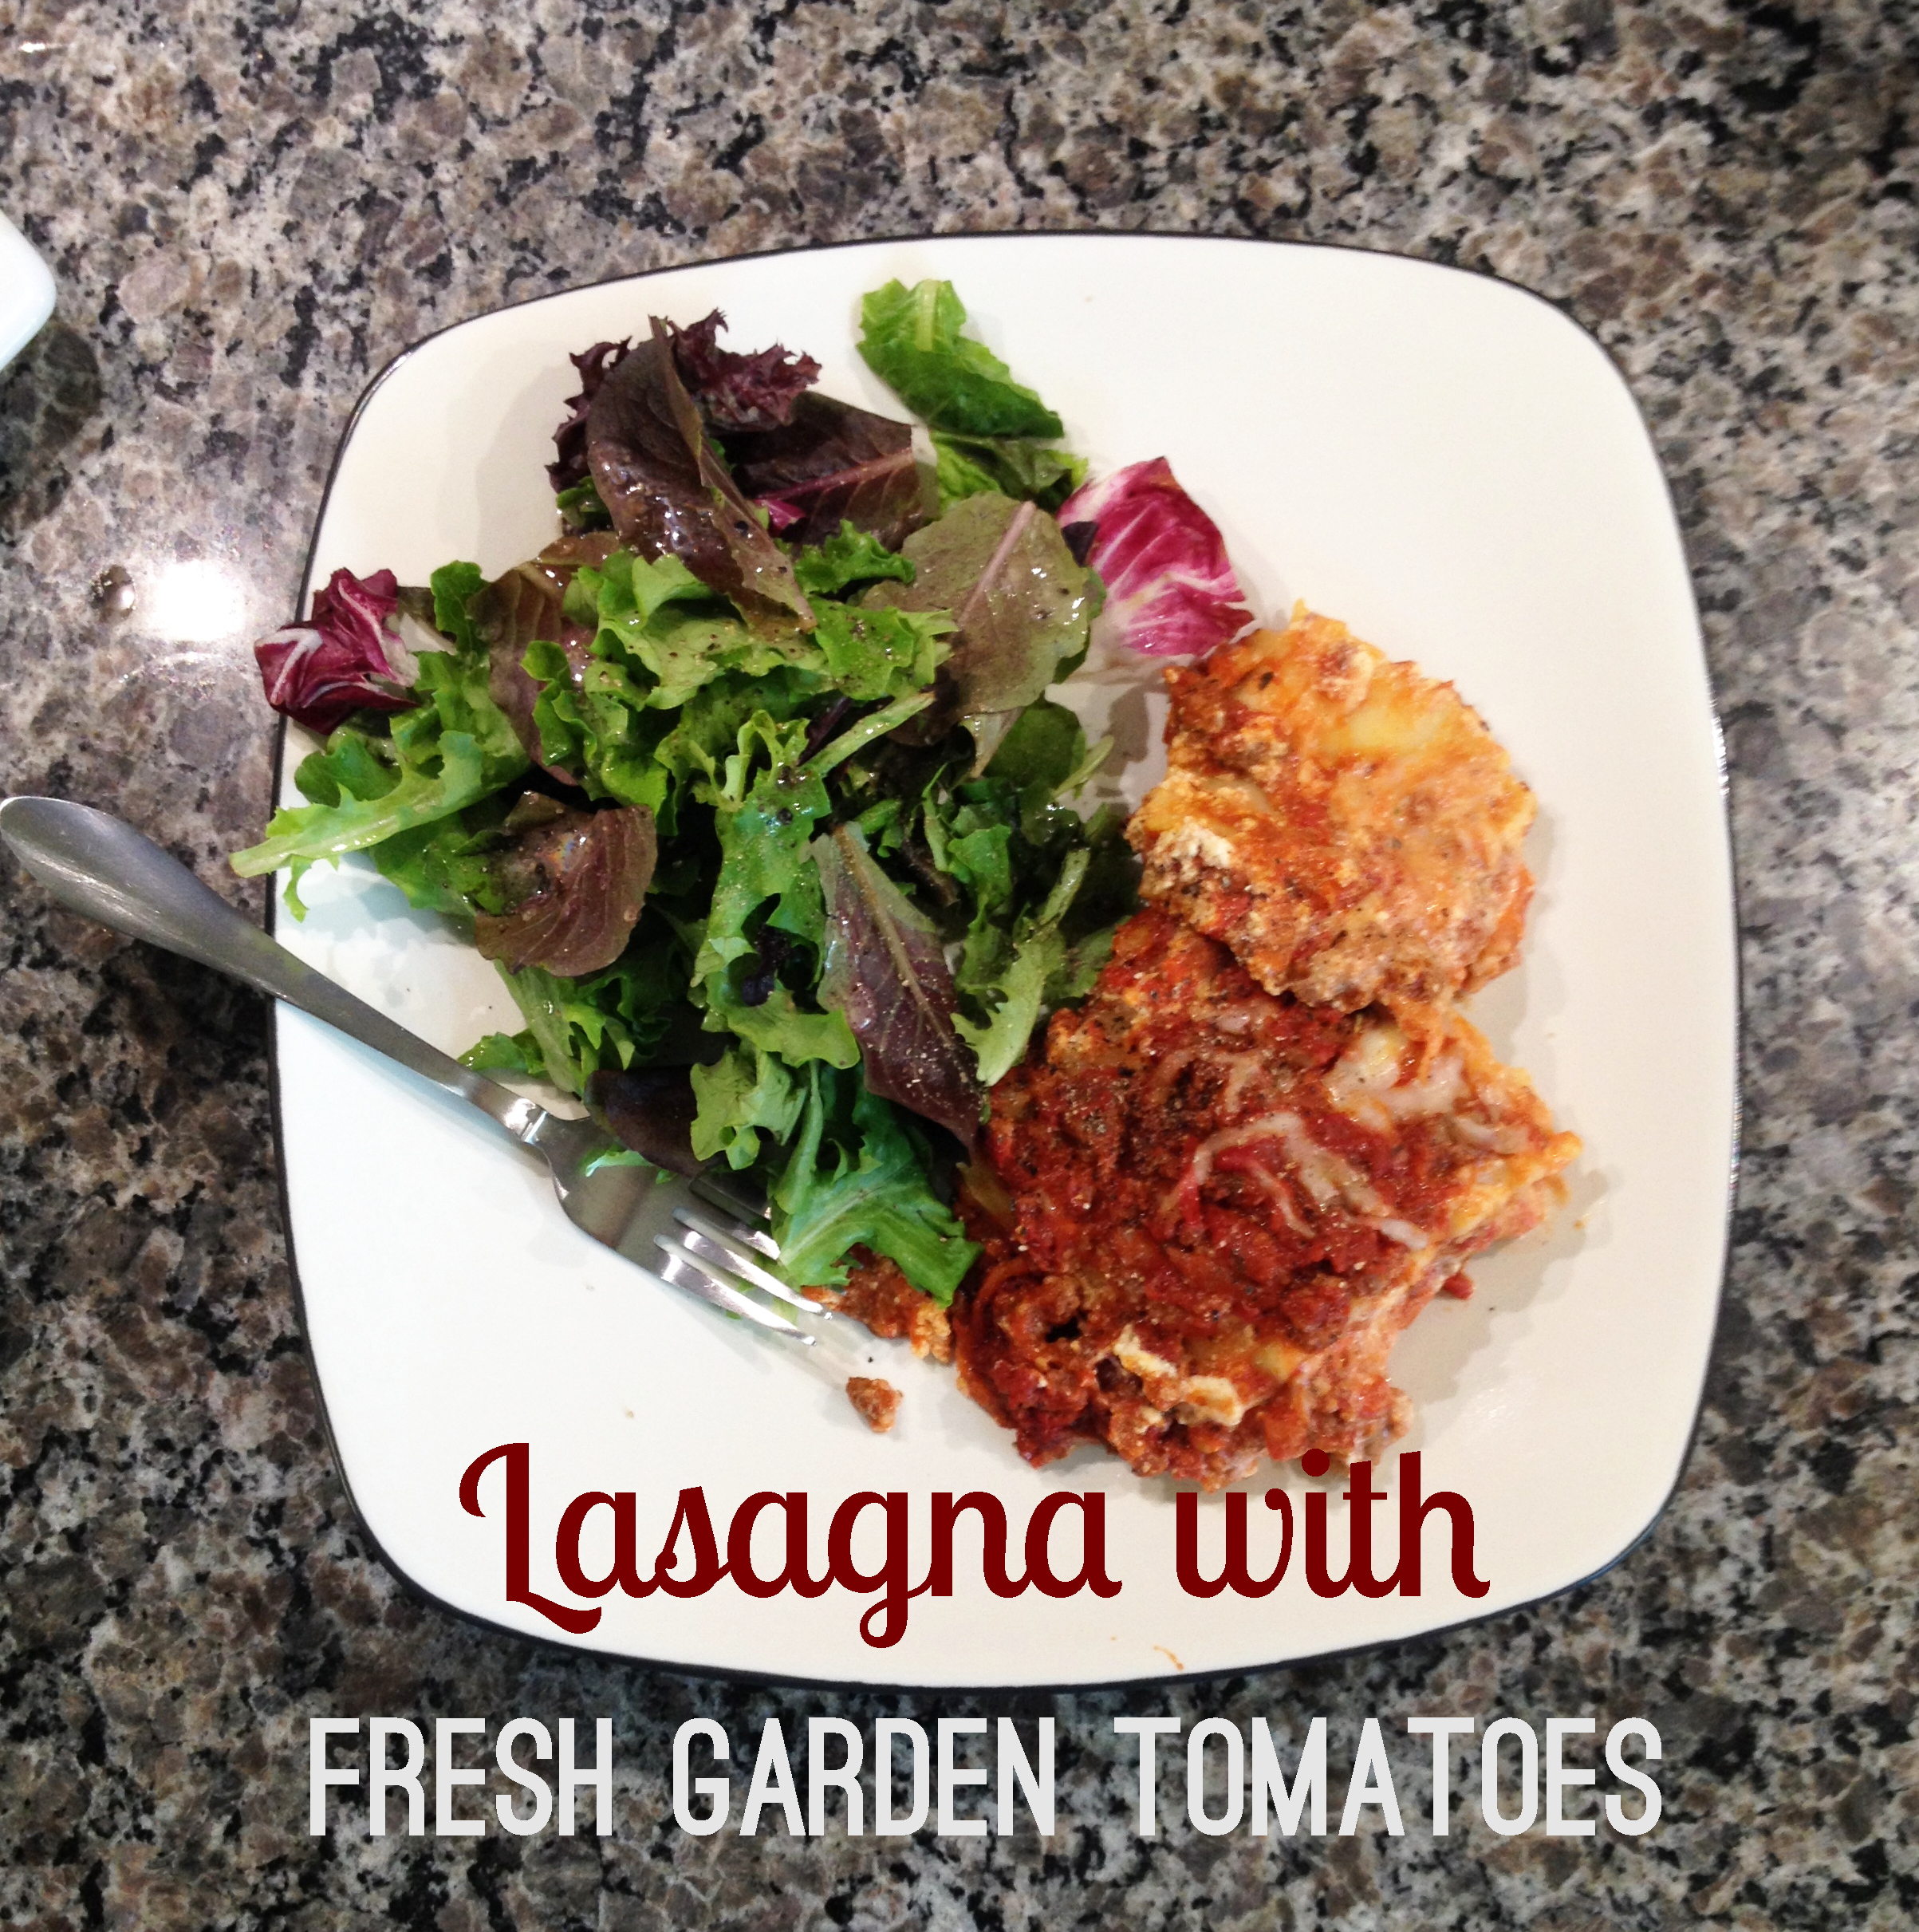 lasagna recipe made with fresh garden tomatoes, mozzarella, italian sausage, beef, and spices. dinner ideas. make ahead for many meals. | bexbernard.com